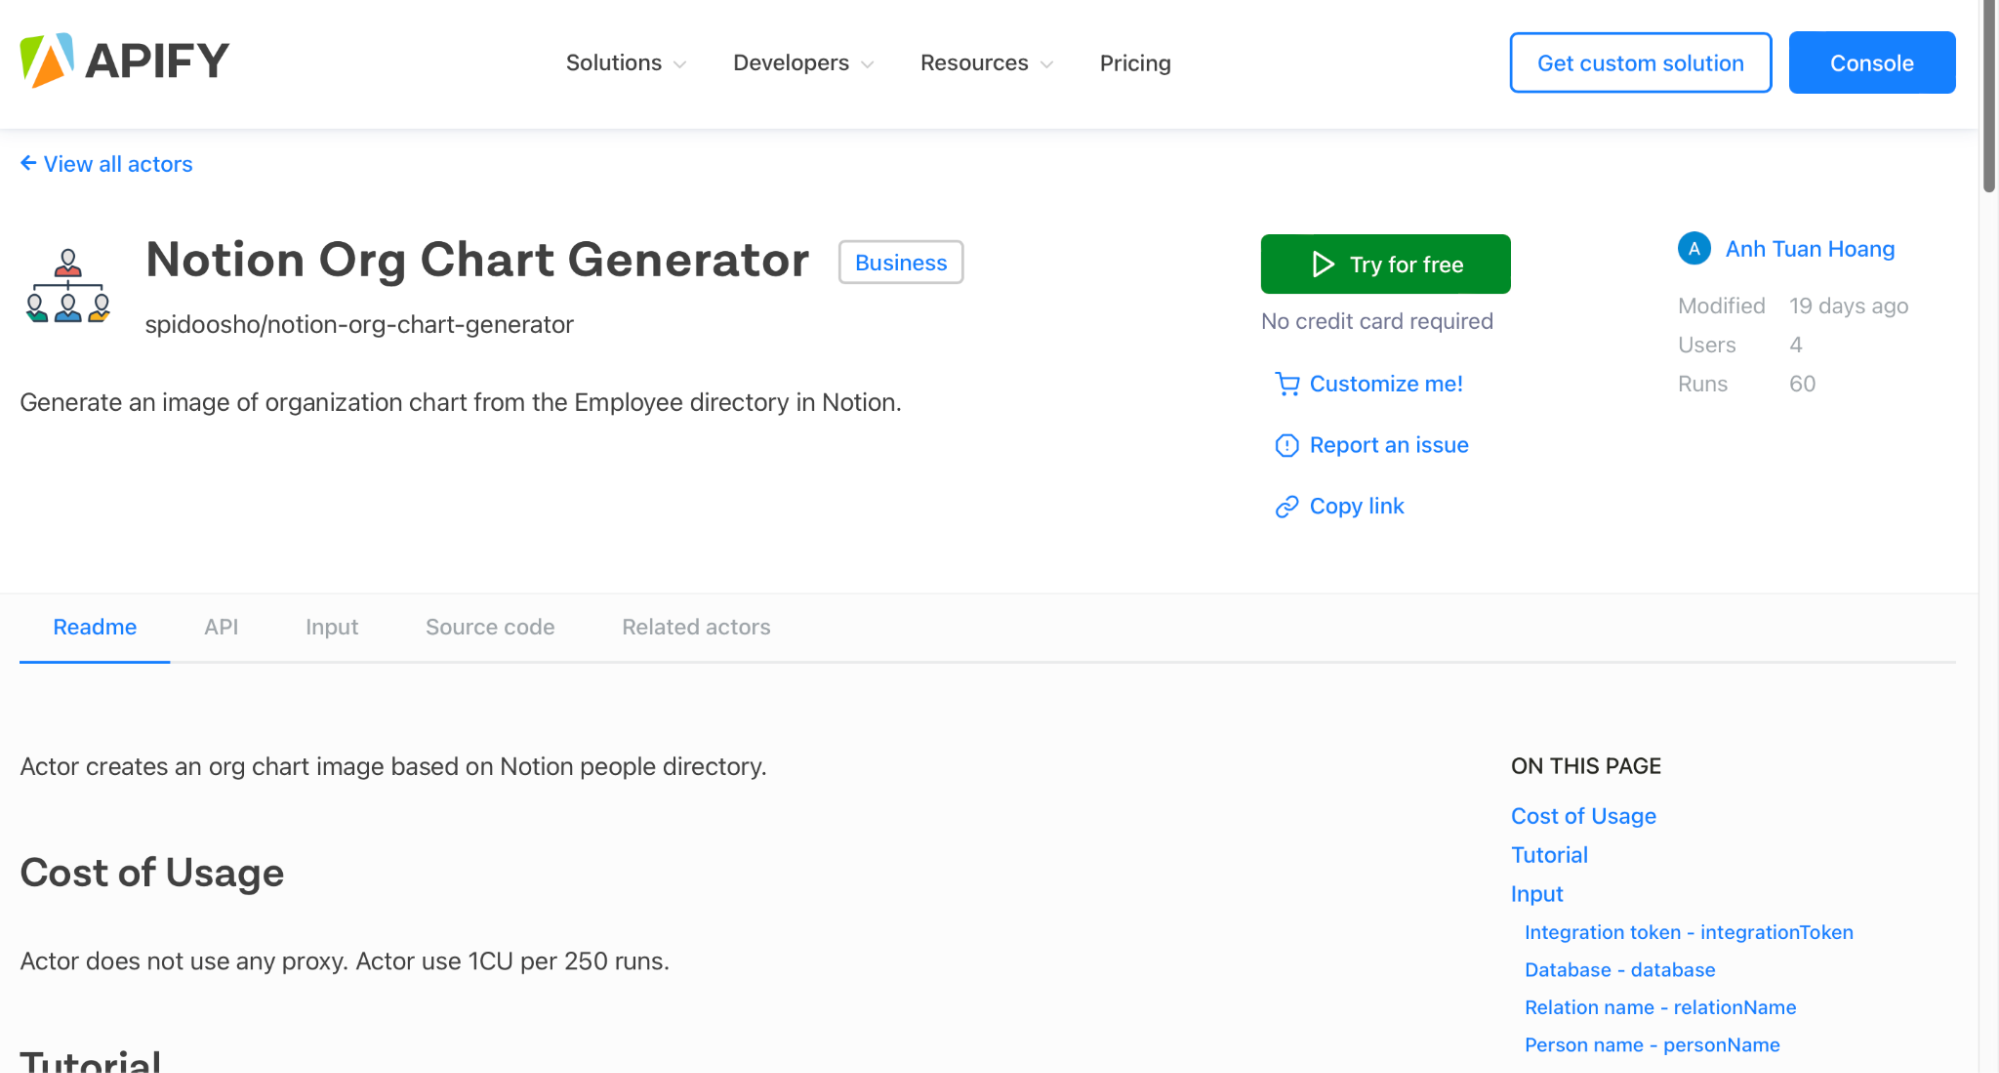 Notion Org Chart Generator's page on Apify Store.